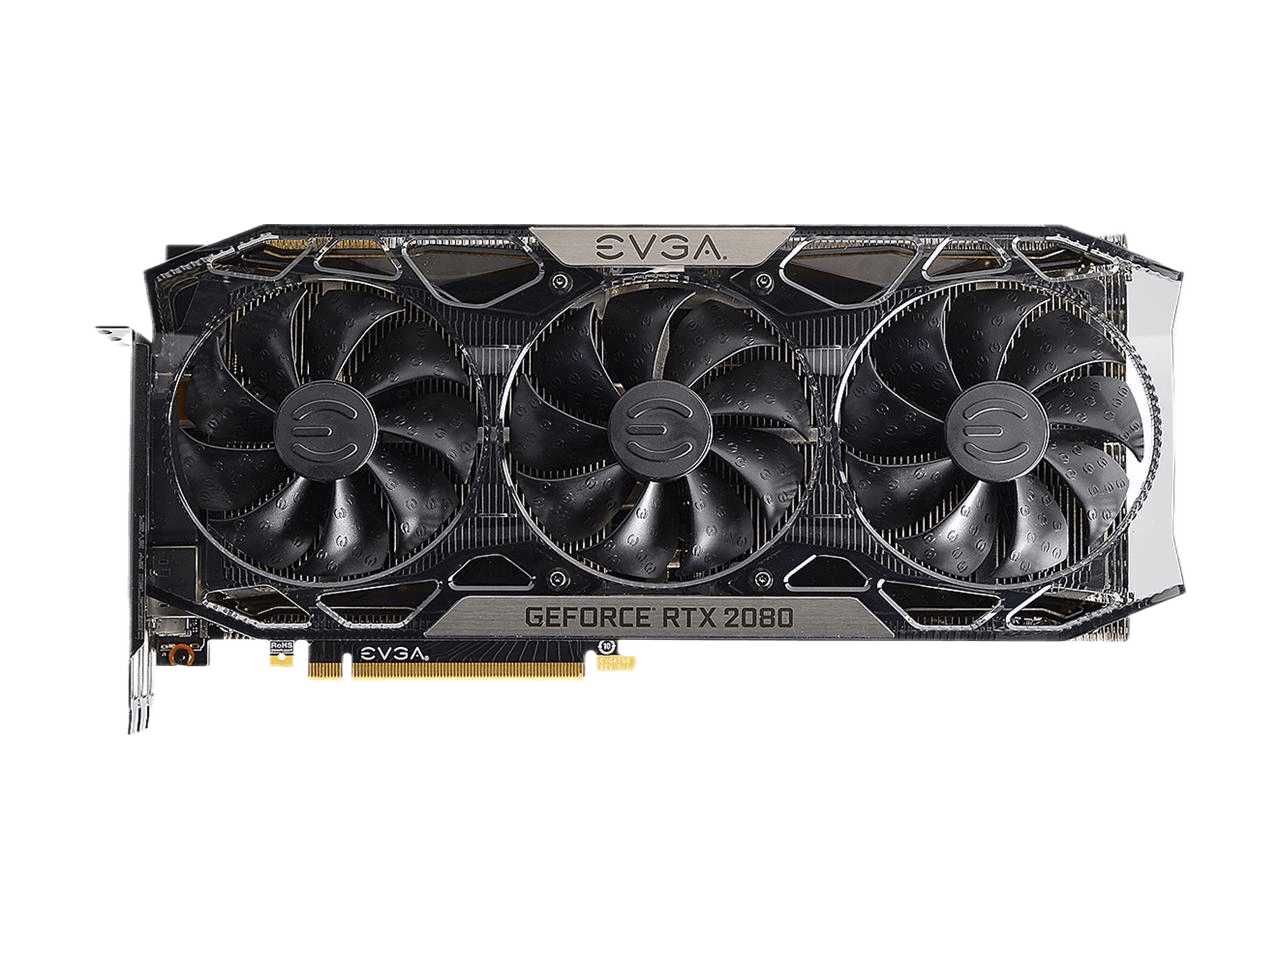 EVGA GeForce RTX 2080 FTW3 ULTRA OVERCLOCKED 8GB GDDR6 2.75 Slot Extreme Cool Triple + iCX2, 65C Gaming RGB Metal Backplate Video Graphics Card 08G-P4-2287-RX